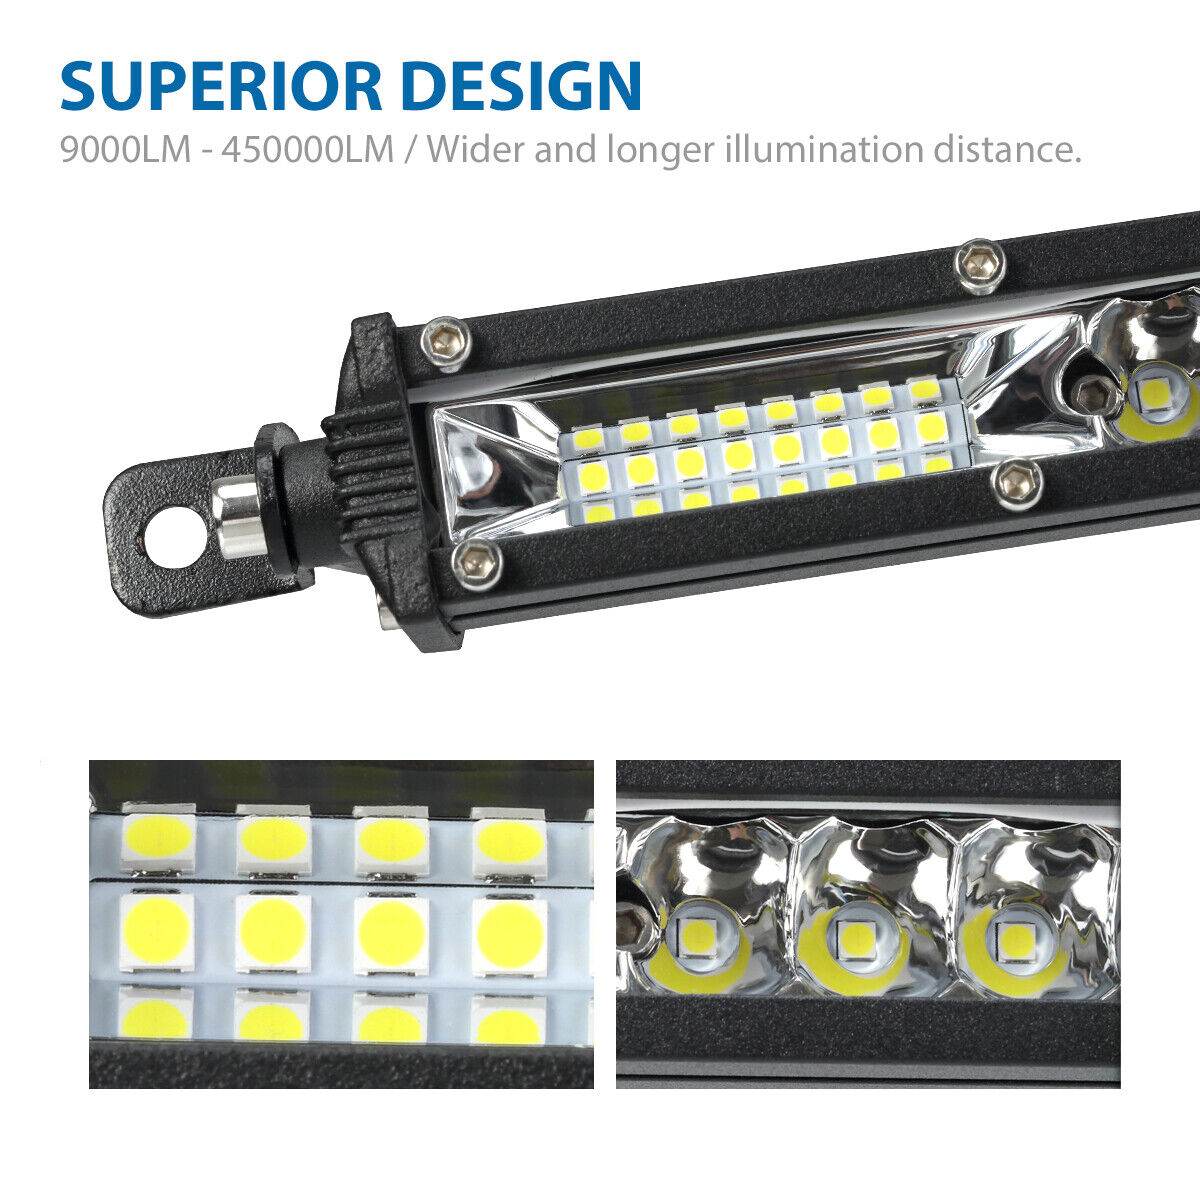 2x 12" inch 450W LED Work Light Bar Combo Spot Flood Driving Off Road SUV Boat Unbranded Does Not Apply - фотография #5